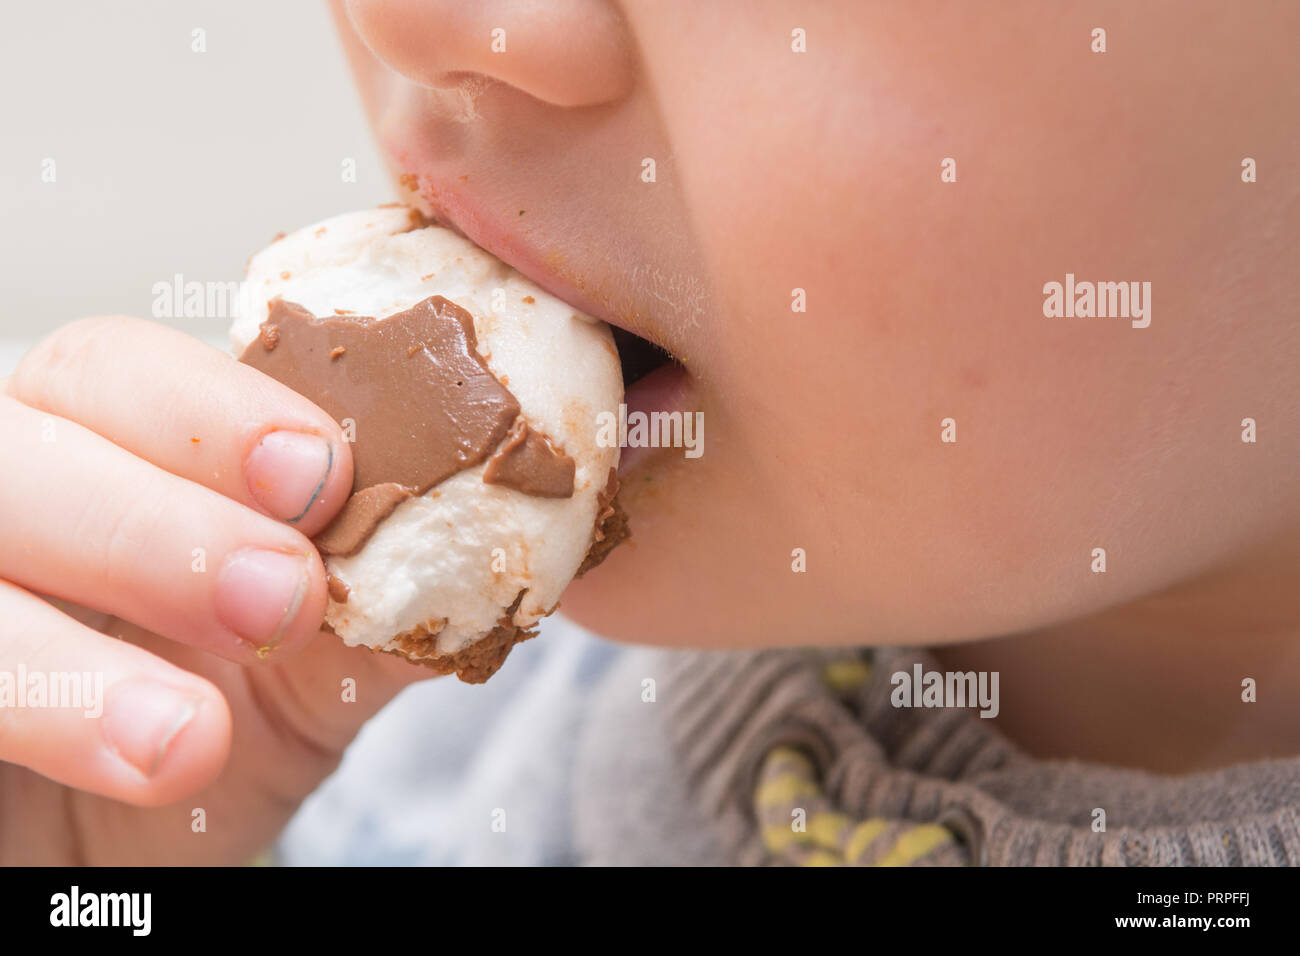 Young child eating a sugary chocolate snack Stock Photo